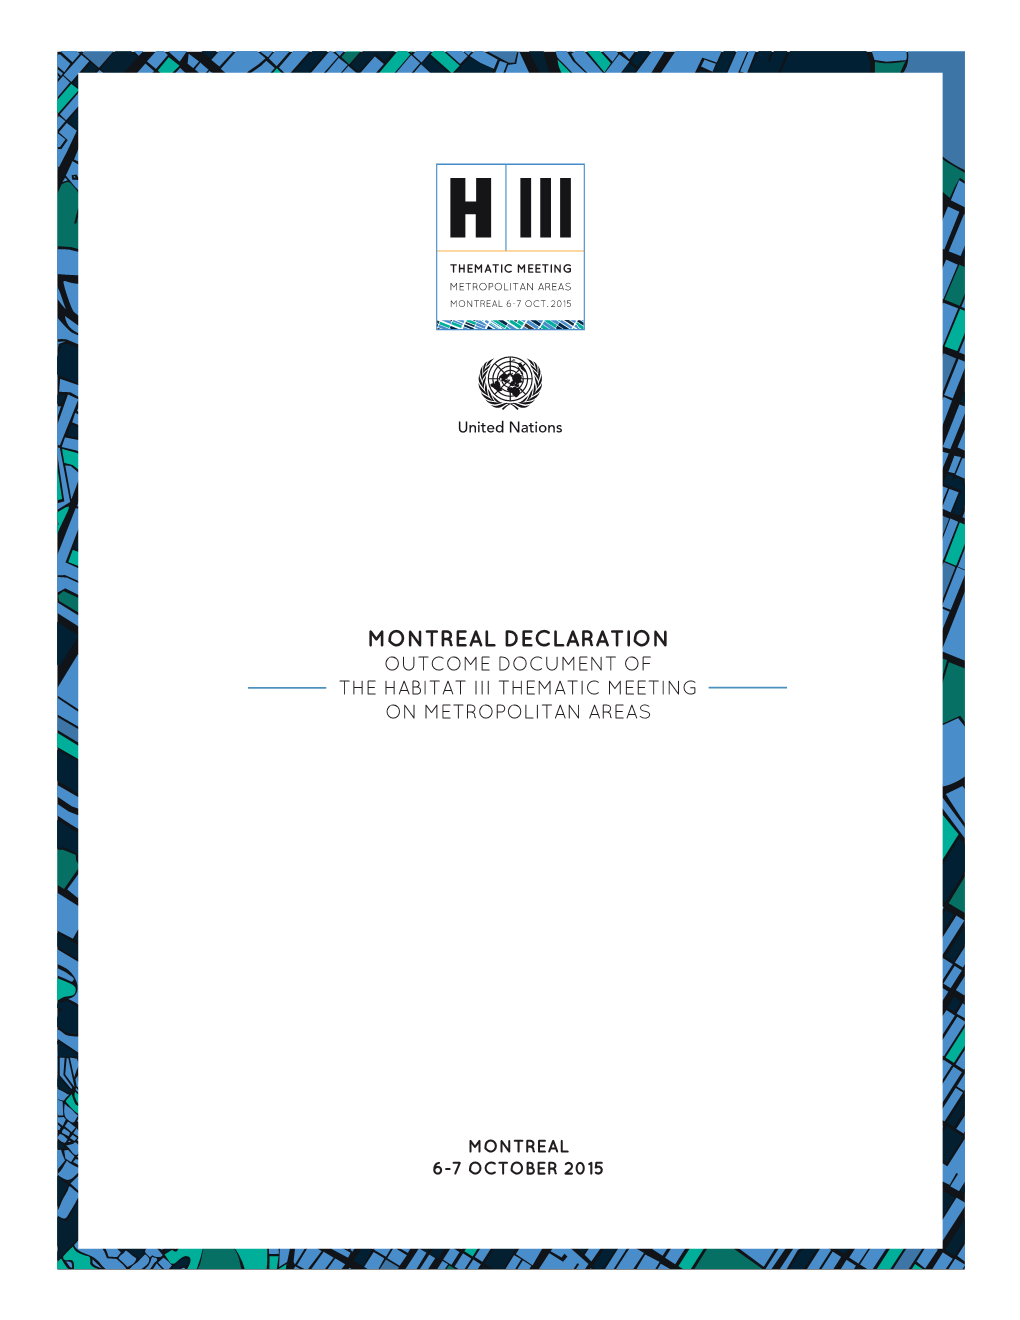 Montreal Declaration Outcome Document of the Habitat Iii Thematic Meeting on Metropolitan Areas